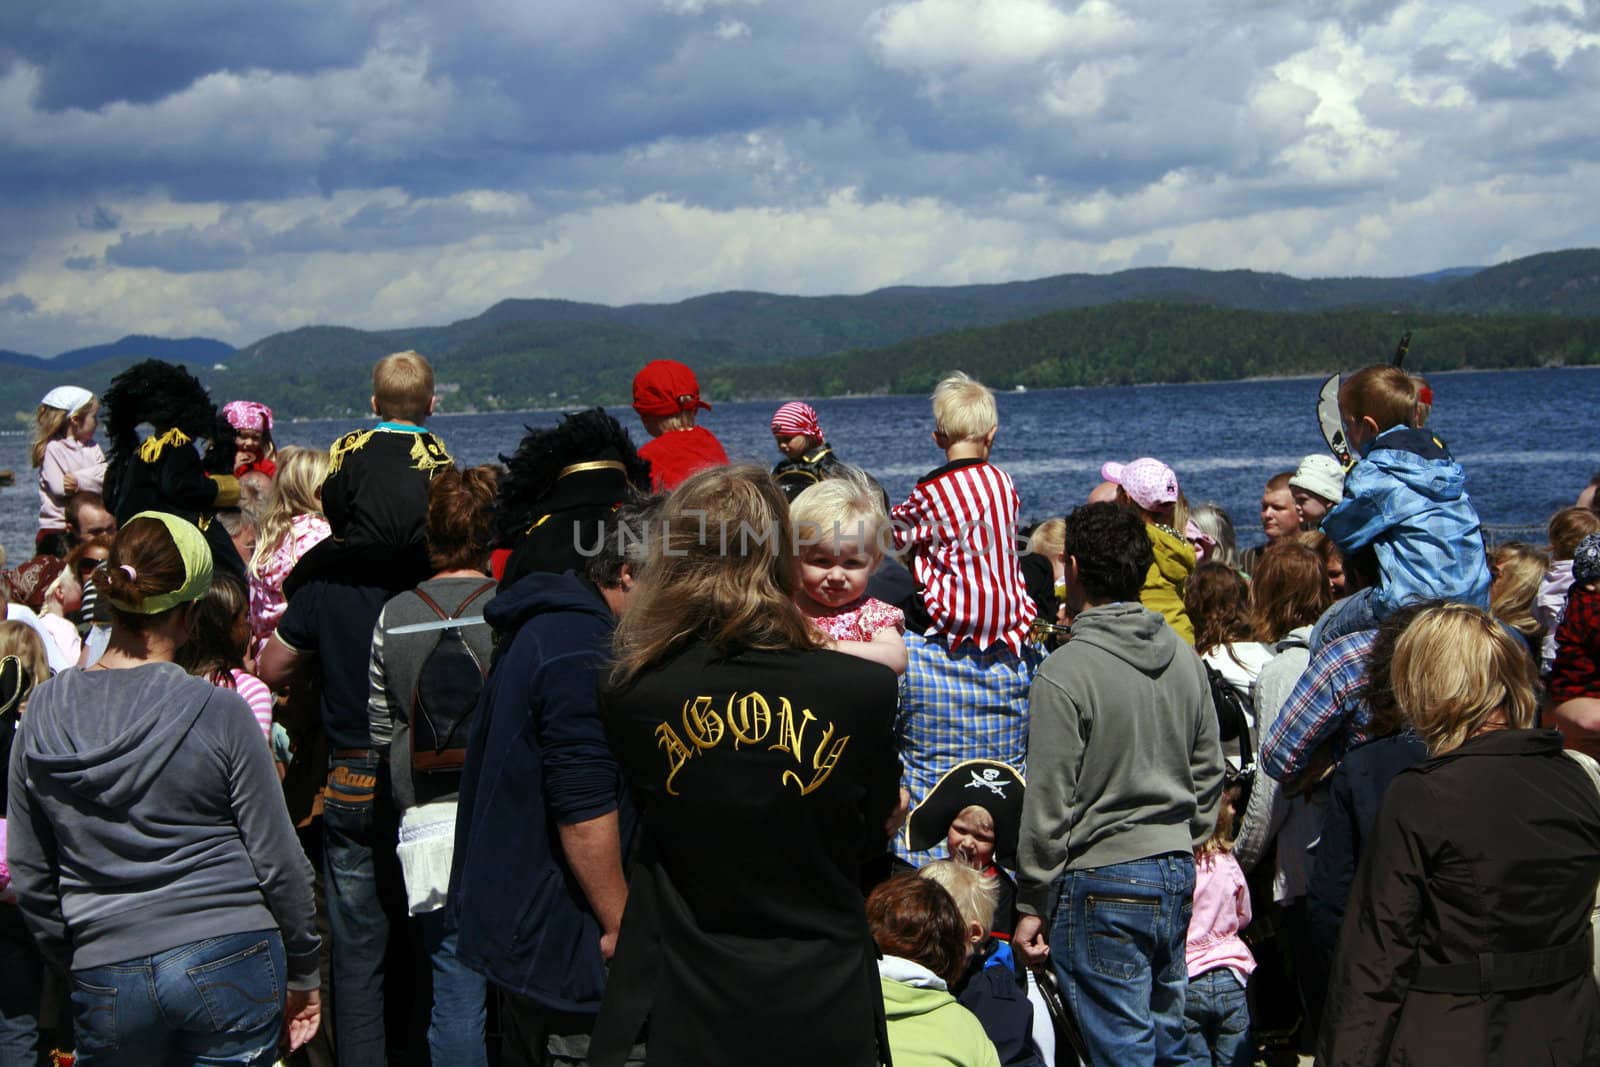 crowd of people at a pirat gathering in Holmestrand, Norway, a man holding a toddler, his jacket has the word agony formed on the back.